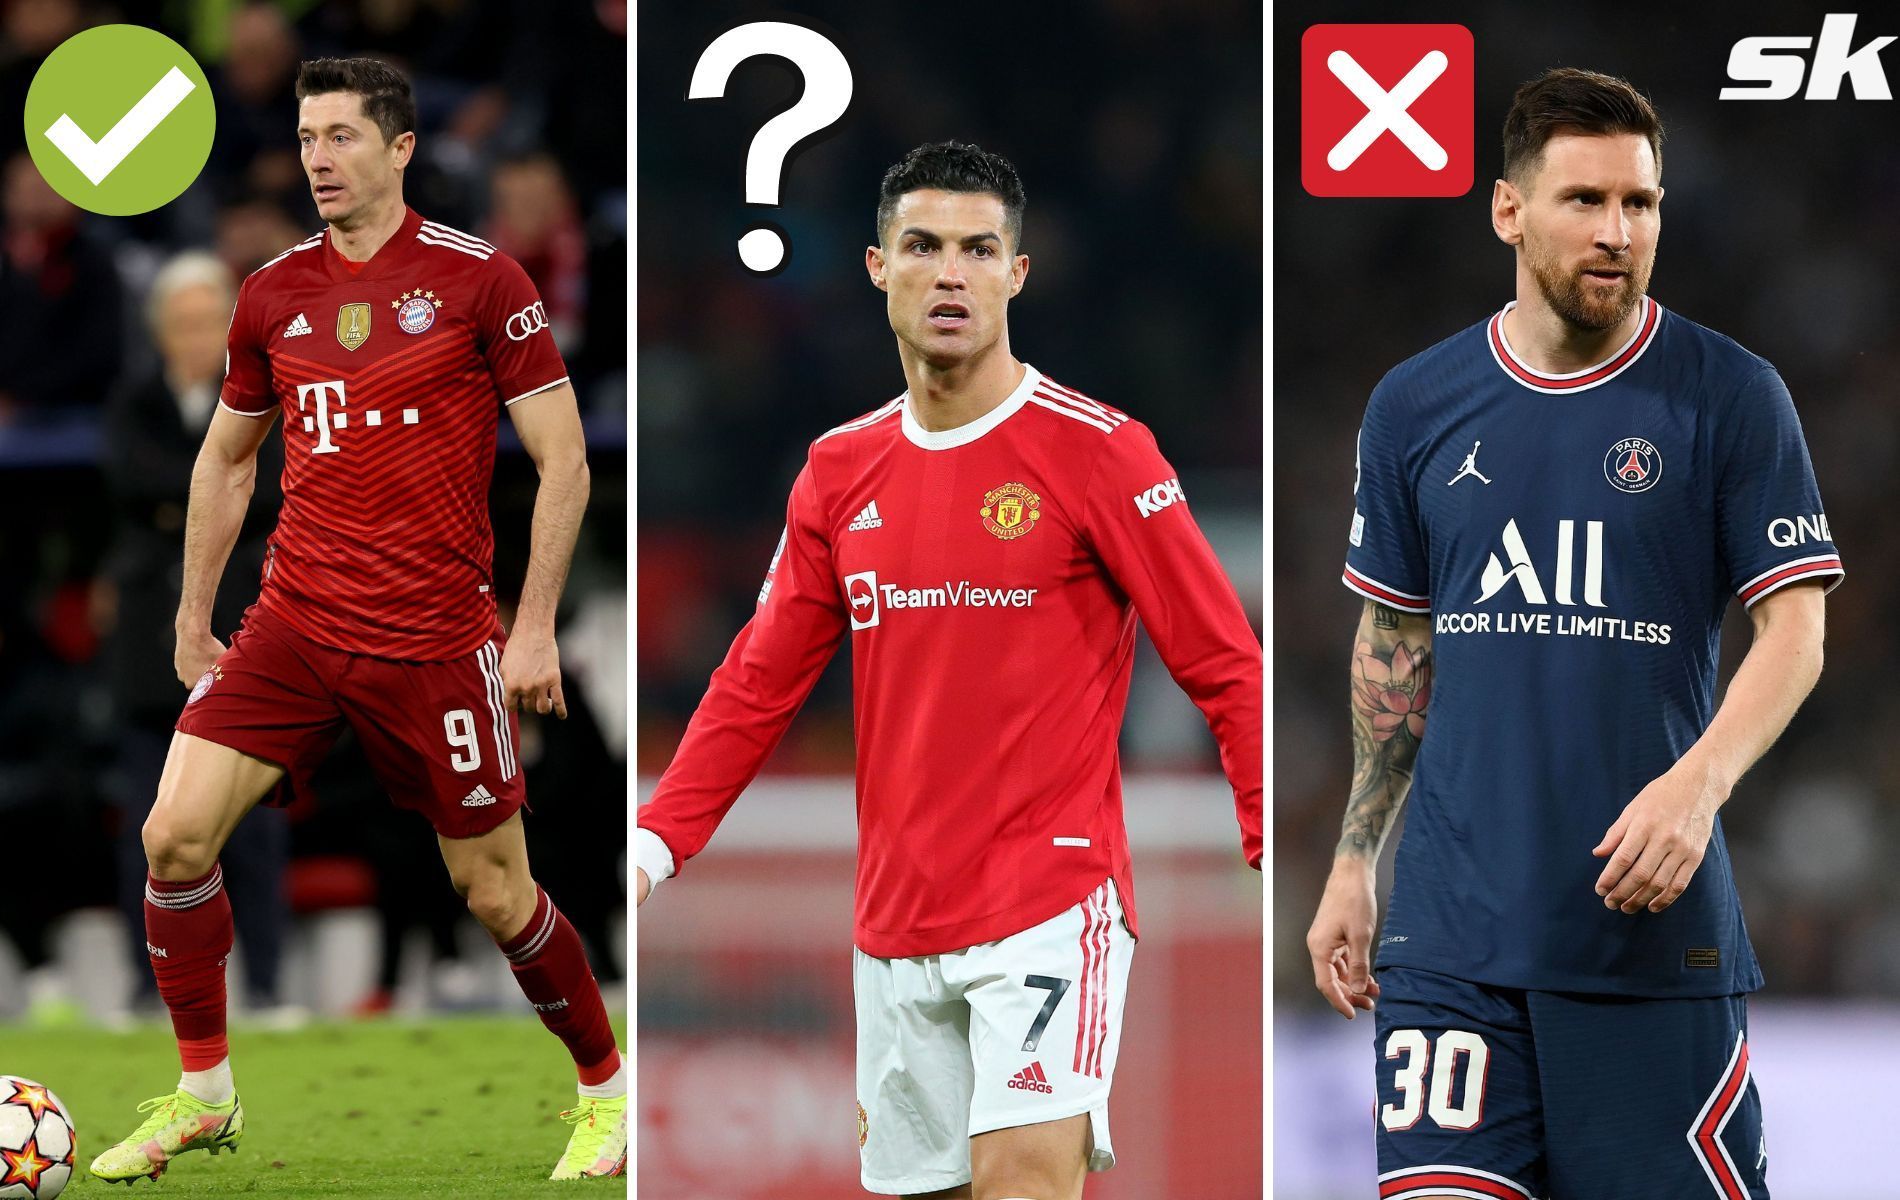 Will Cristiano Ronaldo feature in the Champions League Team of the group stage?